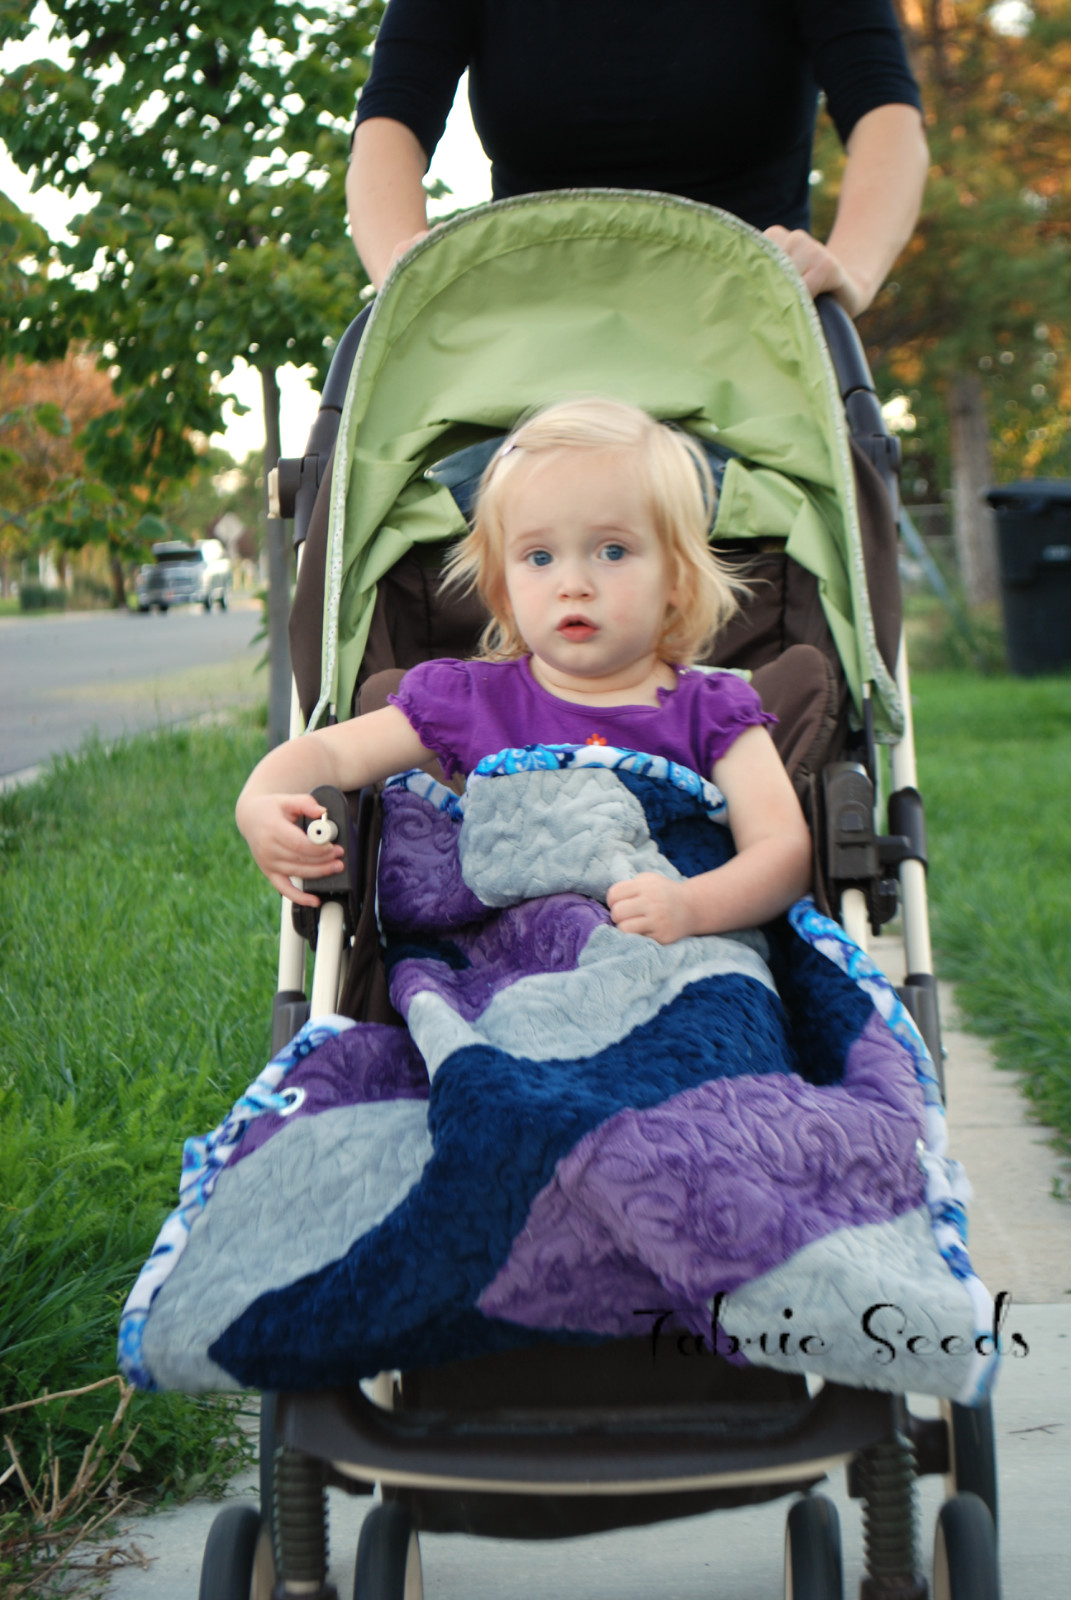 Fabric Seeds: Cuddle Stroller Quilt With Ties Tutorial